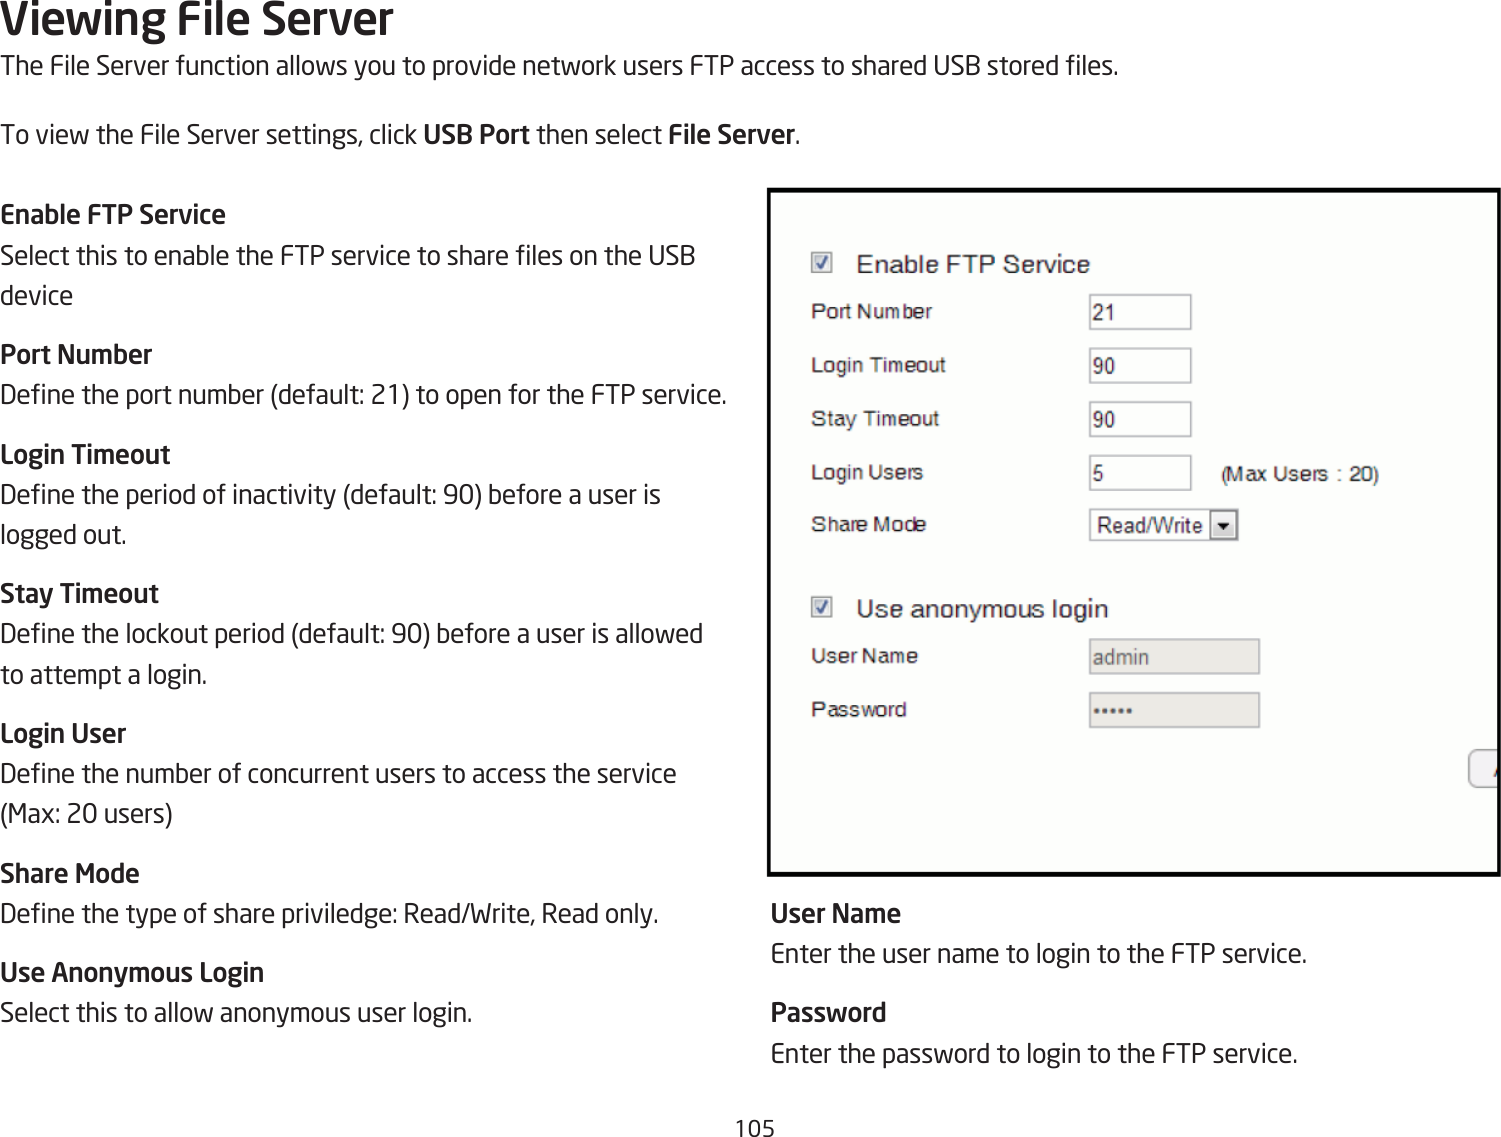 15Viewing File ServerThe File Server function allofs you to provide netfork users FTP access to shared US1 stored les.To vief the File Server settings, click USB Port then select File Server.Enable FTP ServiceSelect this to enaQle the FTP service to share les on the US1 devicePort Nu\ber3ene the port numQer default: 21 to open for the FTP service.Login Ti\eout3ene the period of inactivity default: 9 Qefore a user is logged out.Stay Ti\eout3ene the lockout period default: 9 Qefore a user is allofed to attempt a login.Login User3ene the numQer of concurrent users to access the service &lt;ag: 2 usersShare Mode3ene the type of share priviledge: ReadFrite, Read only.Use Anony\ous LoginSelect this to allof anonymous user login.User Na\eEnter the user name to login to the FTP service.PasswordEnter the passford to login to the FTP service.